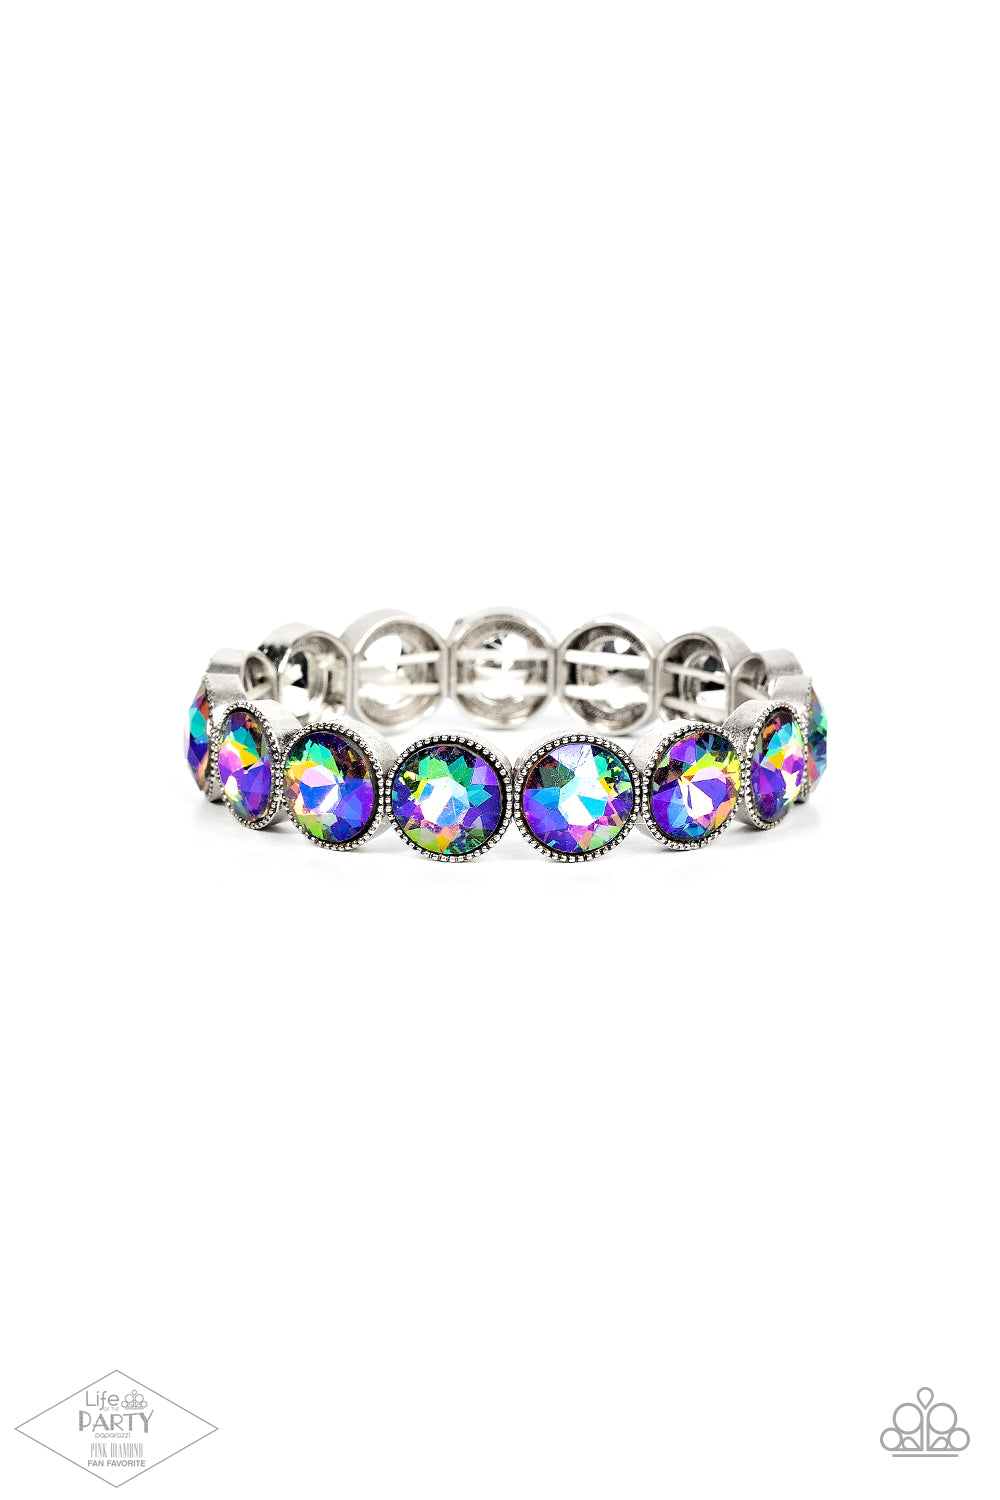 Faceted oil spill-like iridescent gems are pressed into sleek silver frames. The glittery frames are threaded along elastic stretchy bands, creating a glamorous look around the wrist.  Sold as one individual bracelet.